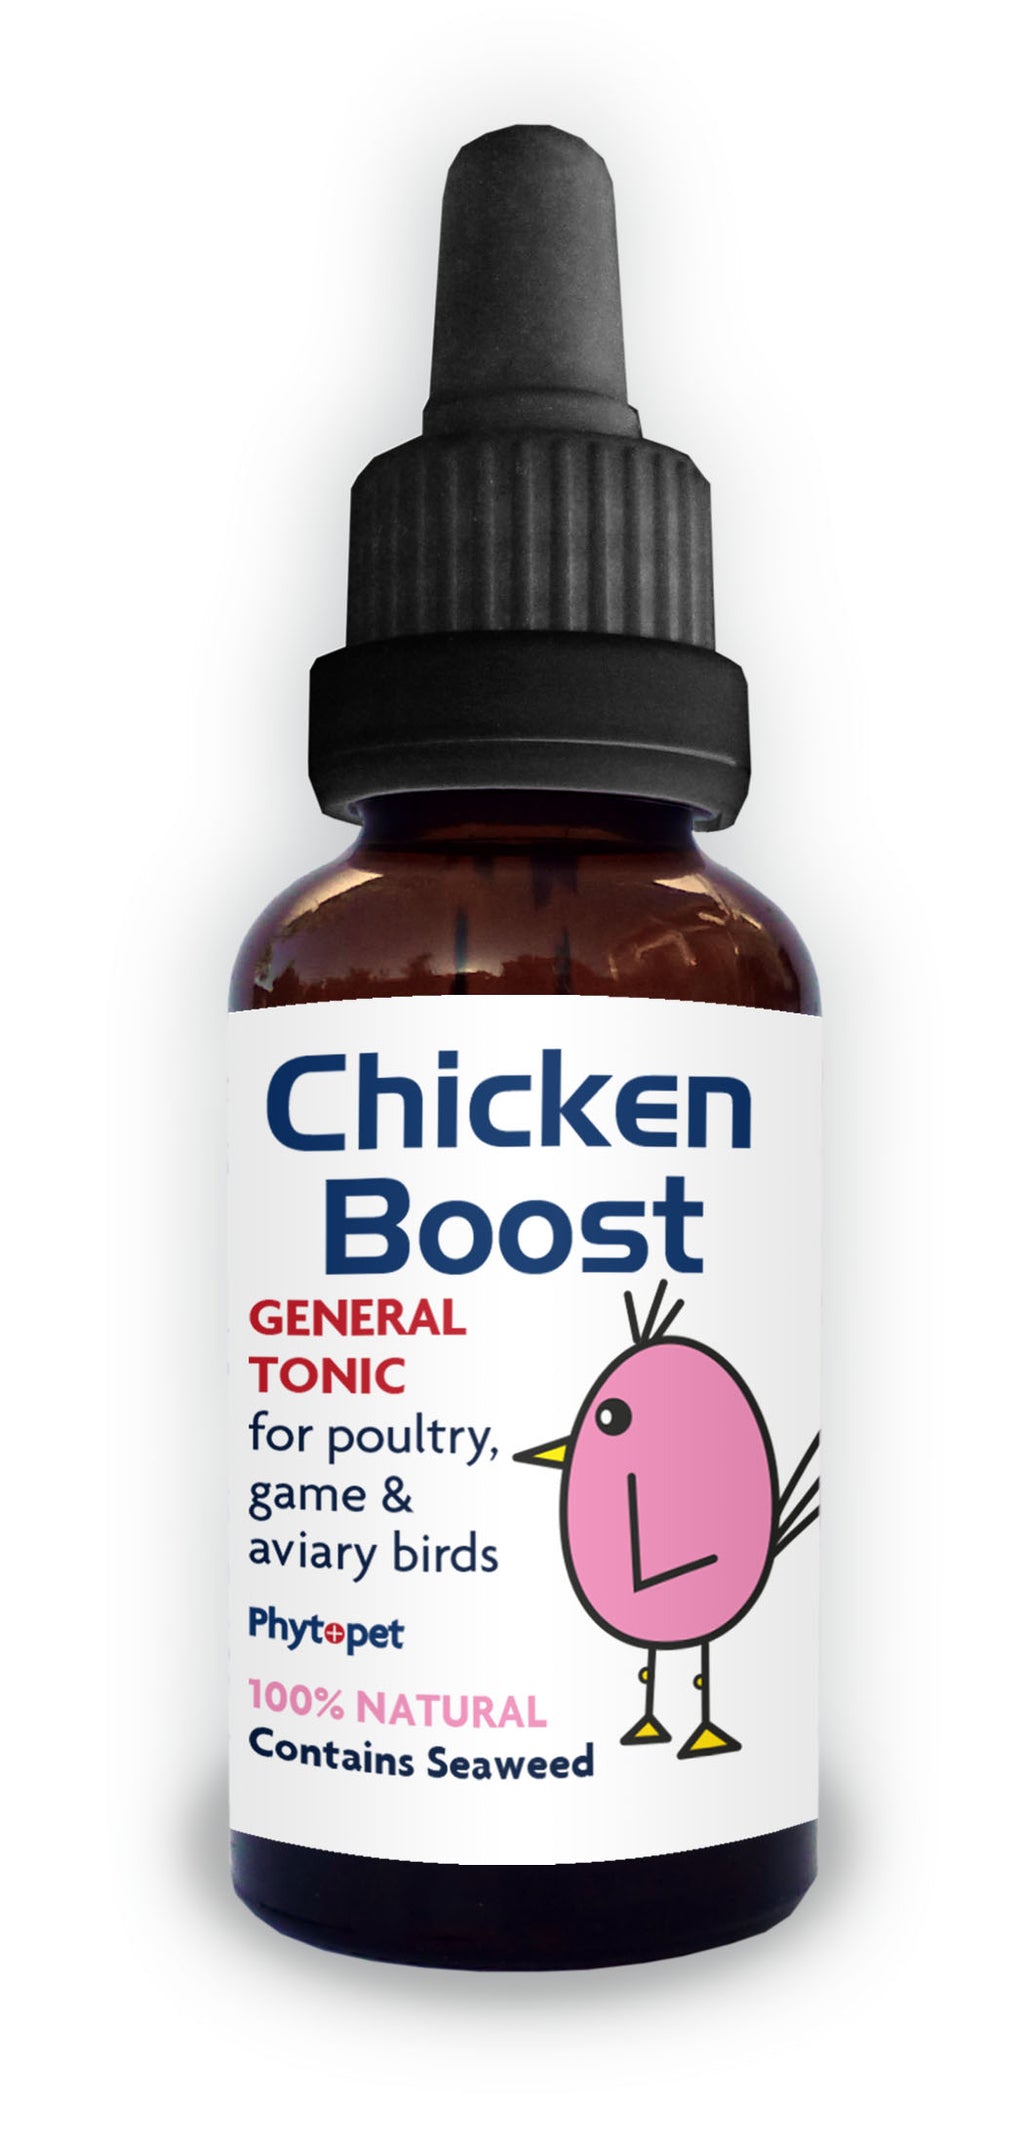 Chicken Boost - General Tonic for Poultry, Game and Aviary birds